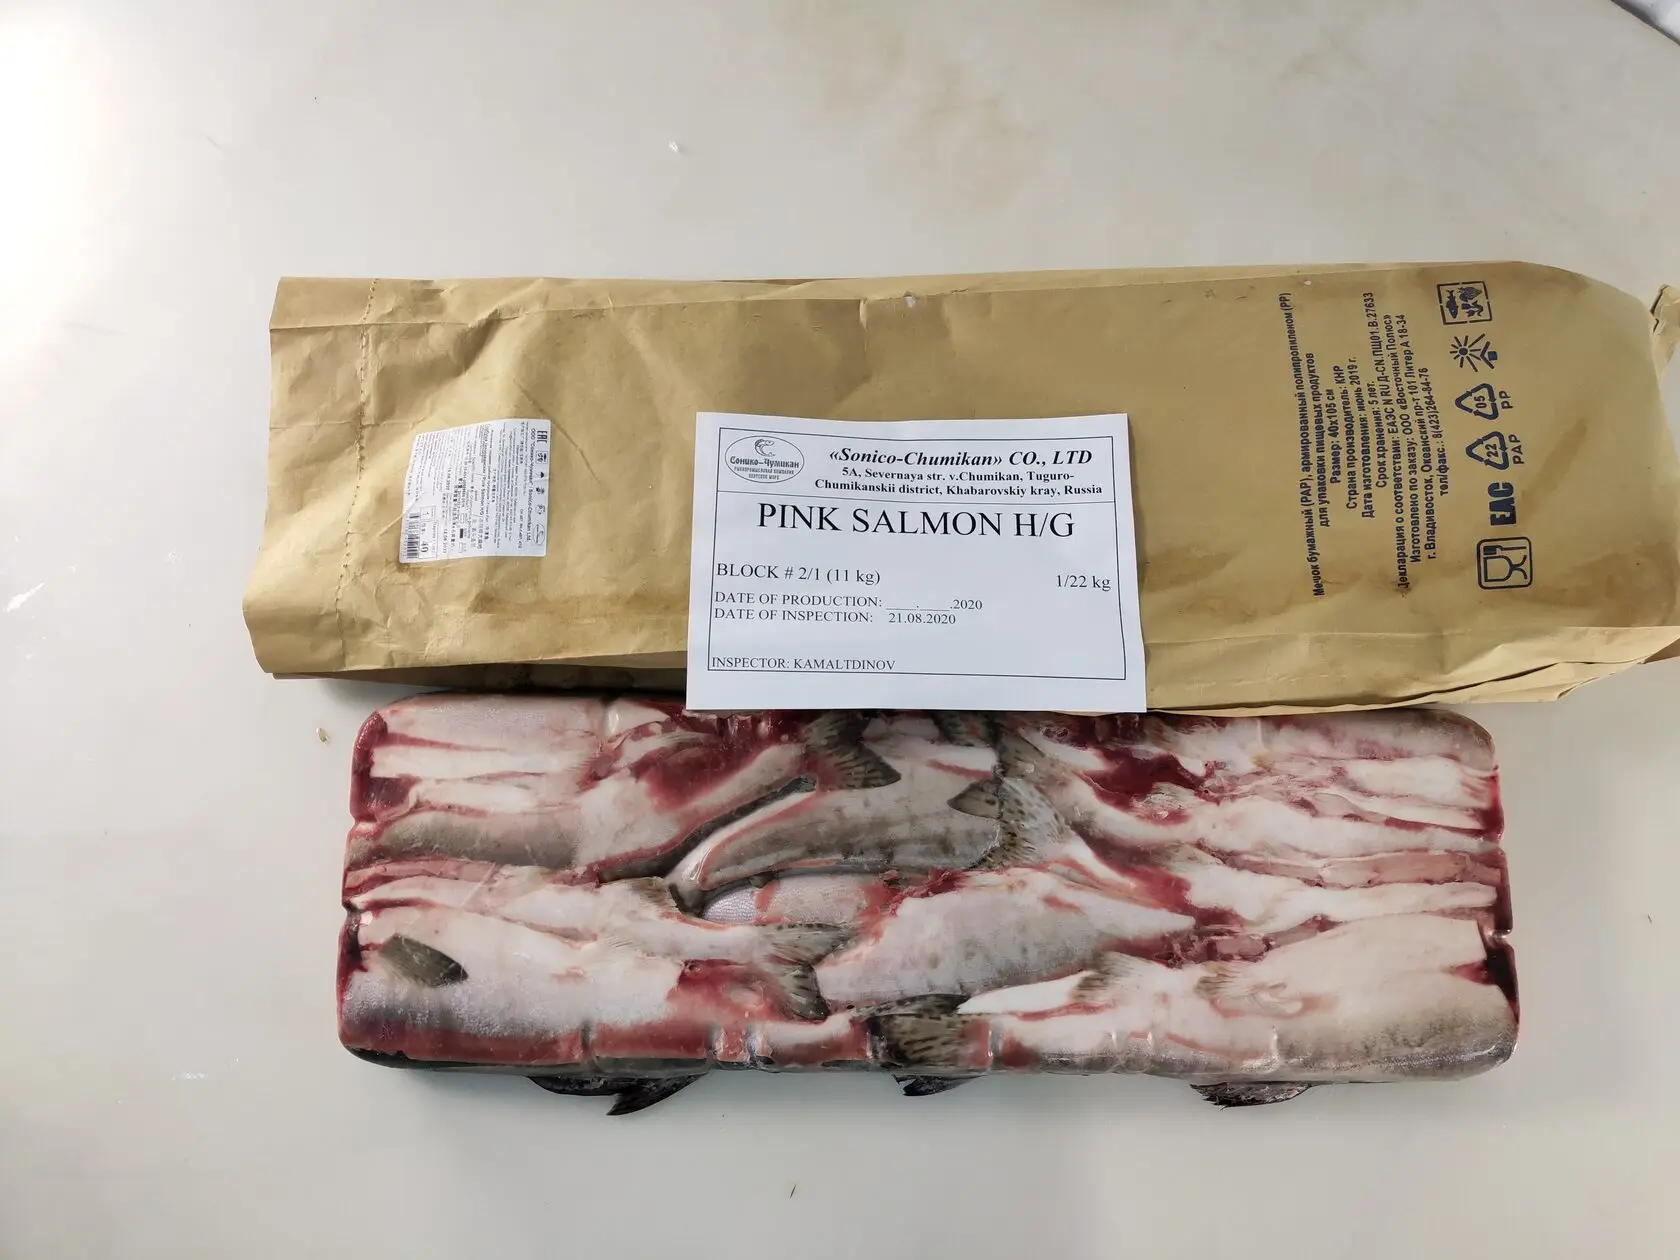 Frozen Pink Fish Food Products Seafood 1/22 kg Block Bag Packaging Oncorhynchus Gorbuscha Salmon Without Head